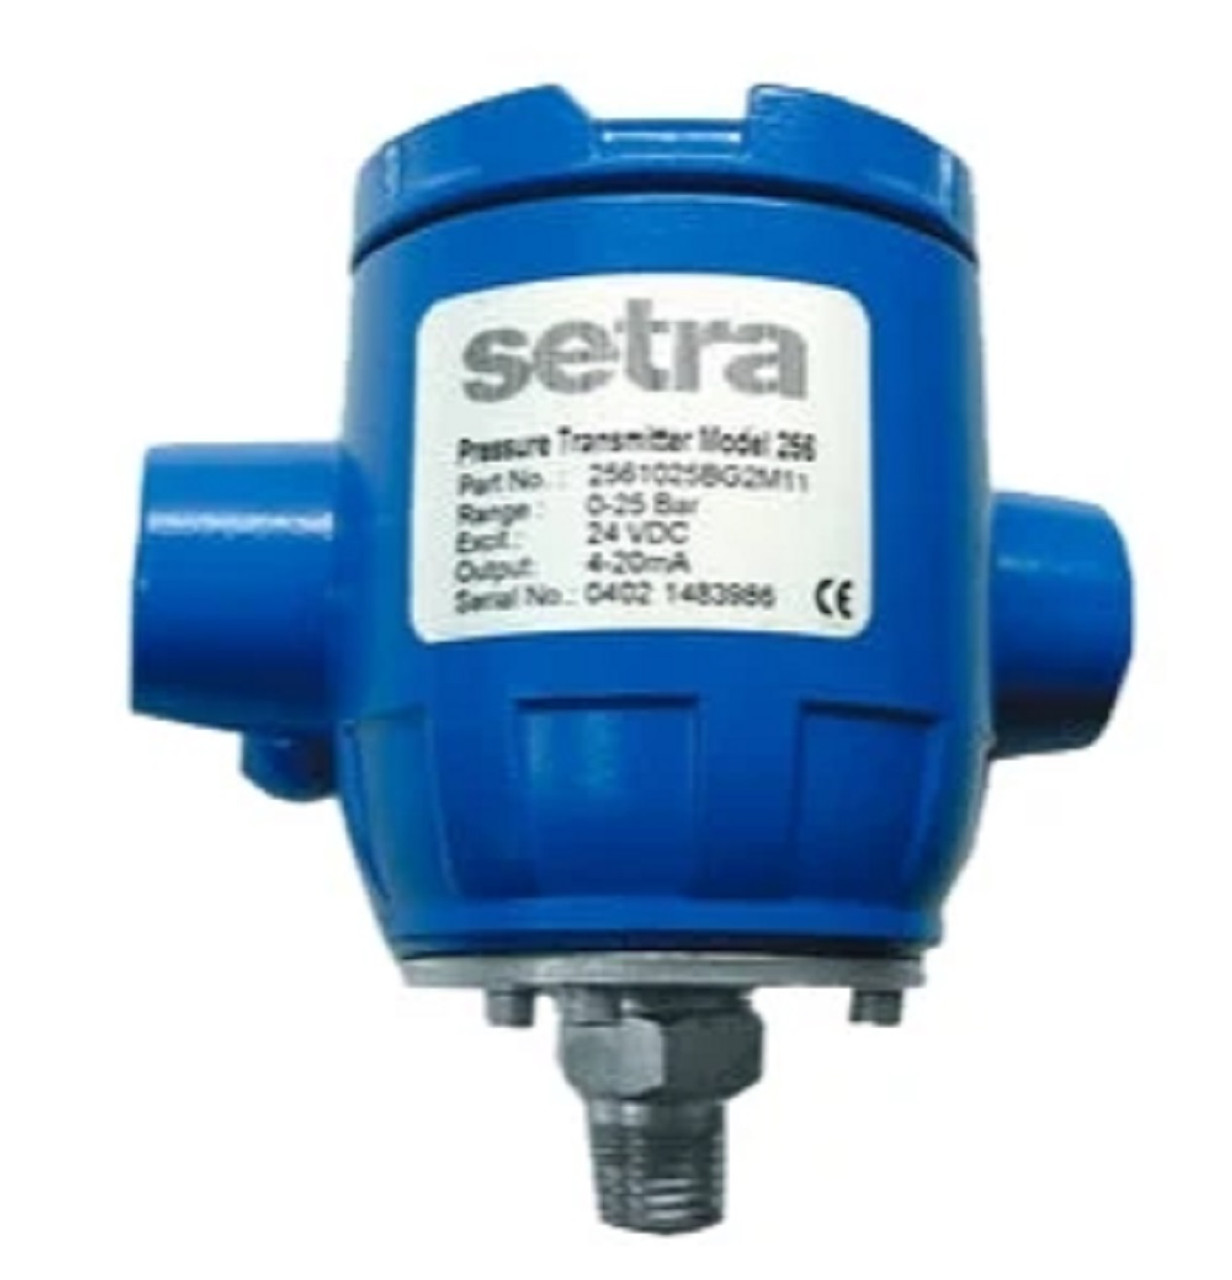 Setra 2561005PG2M11C Series 256 Pressure Transducer, 9-30 VDC Input, 4-20 mA Out [New]